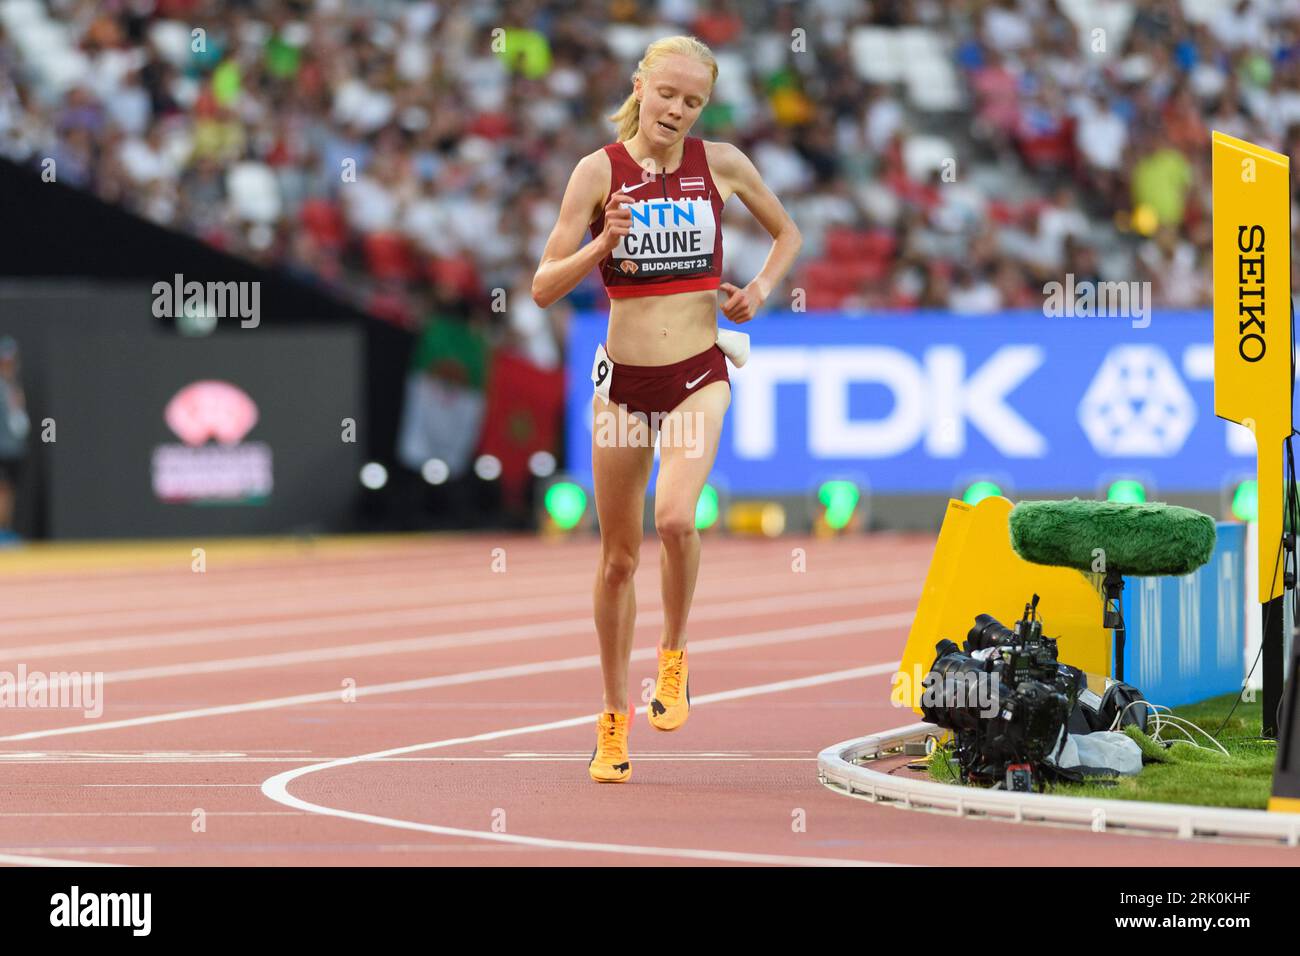 Budapest, Hungary. 23rd Aug, 2023. Agate Caune (Latvia) during the 5000 metres heat during the world athletics championships 2023 at the National Athletics Centre, in Budapest, Hungary. (Sven Beyrich/SPP) Credit: SPP Sport Press Photo. /Alamy Live News Credit: SPP Sport Press Photo. /Alamy Live News Stock Photo